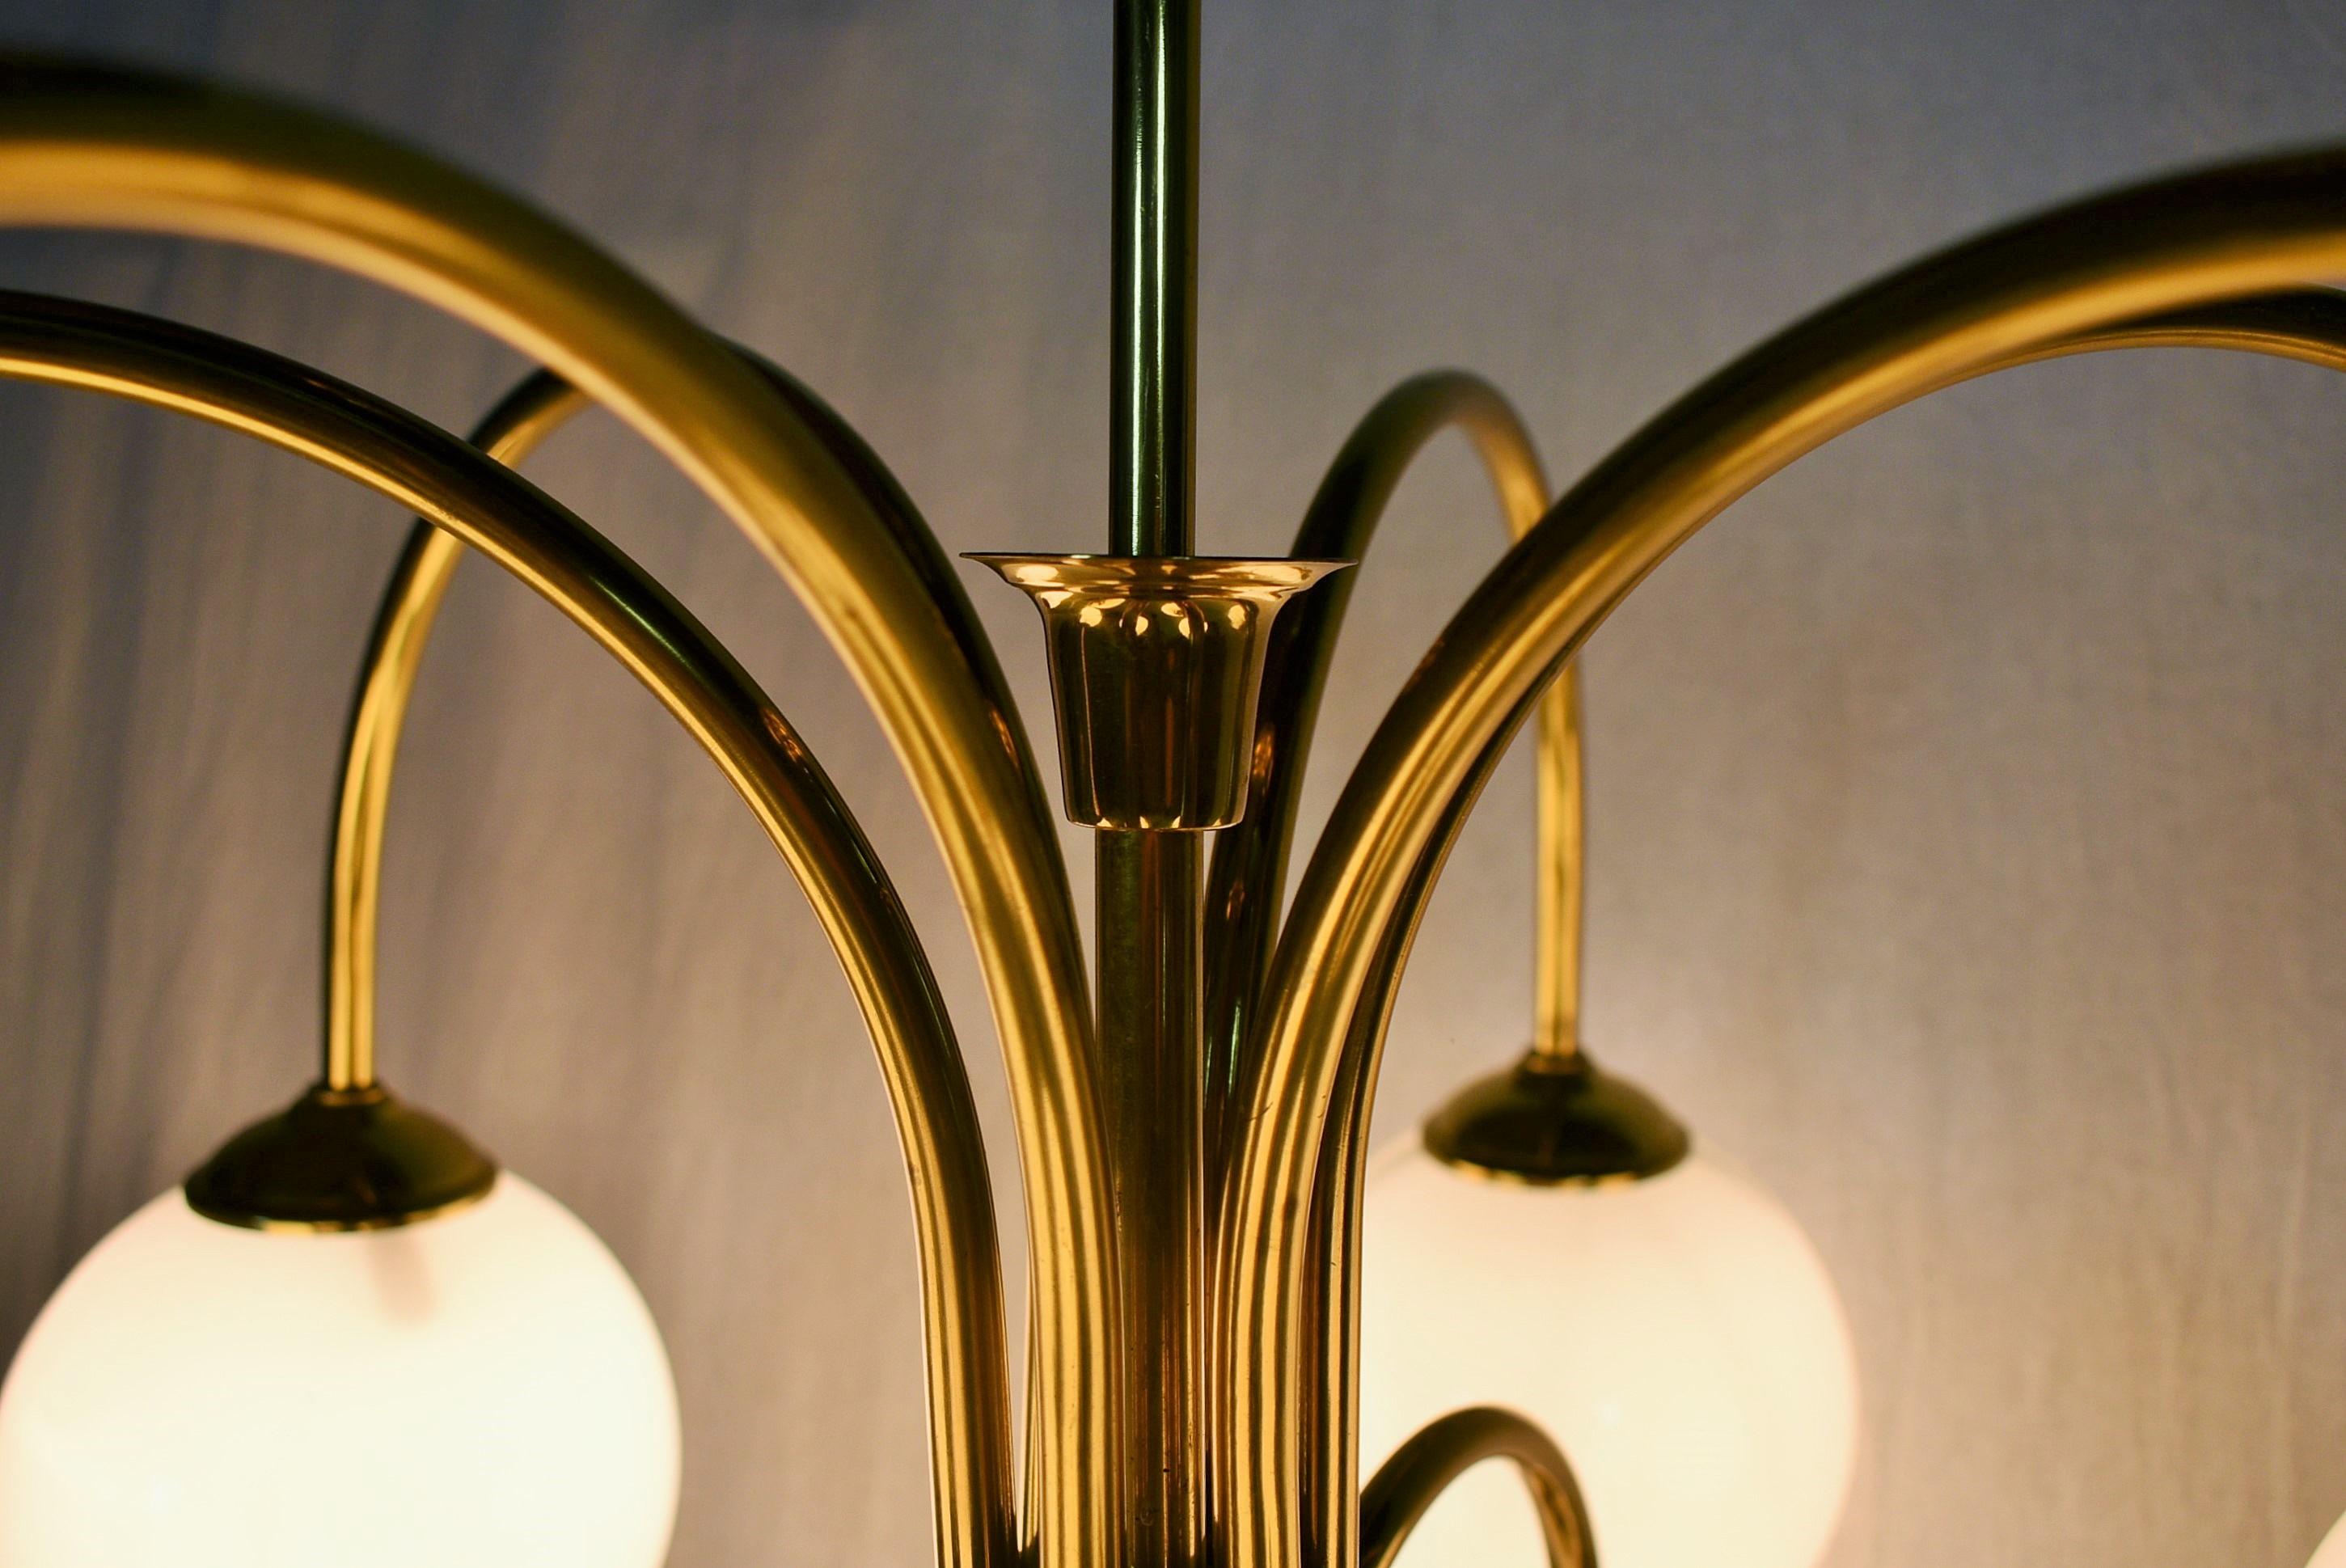 Big 10 flaming chandelier in a very good condition.
Made in Czechoslovakia by Kamenicky Senov in 1970s
10 x 40W, E14.